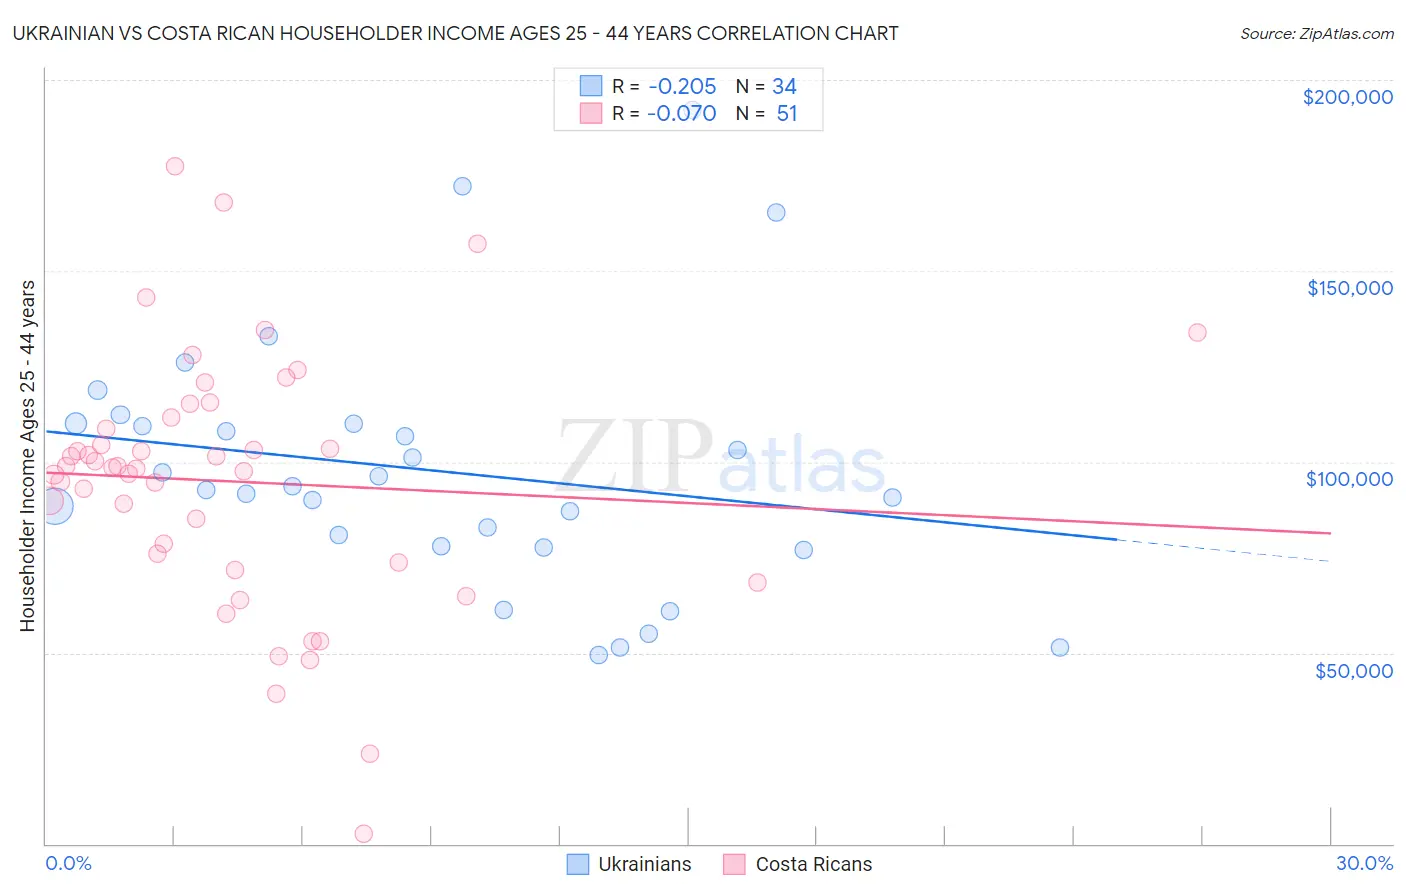 Ukrainian vs Costa Rican Householder Income Ages 25 - 44 years